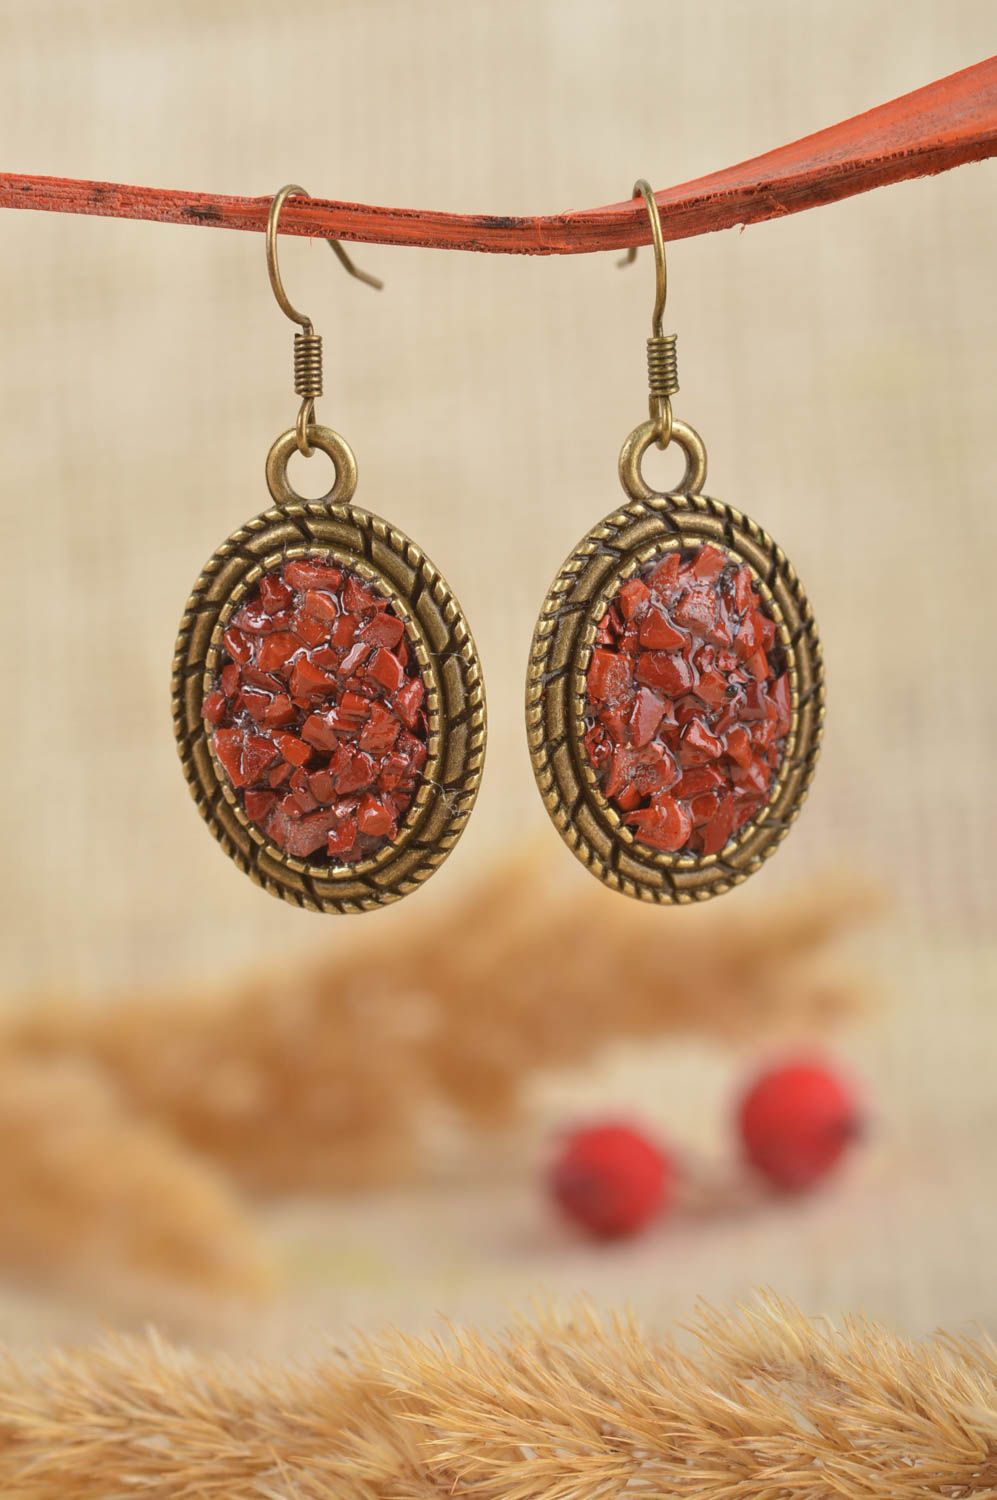 Handmade dangling earrings stylish jewelry earrings with natural stone photo 1